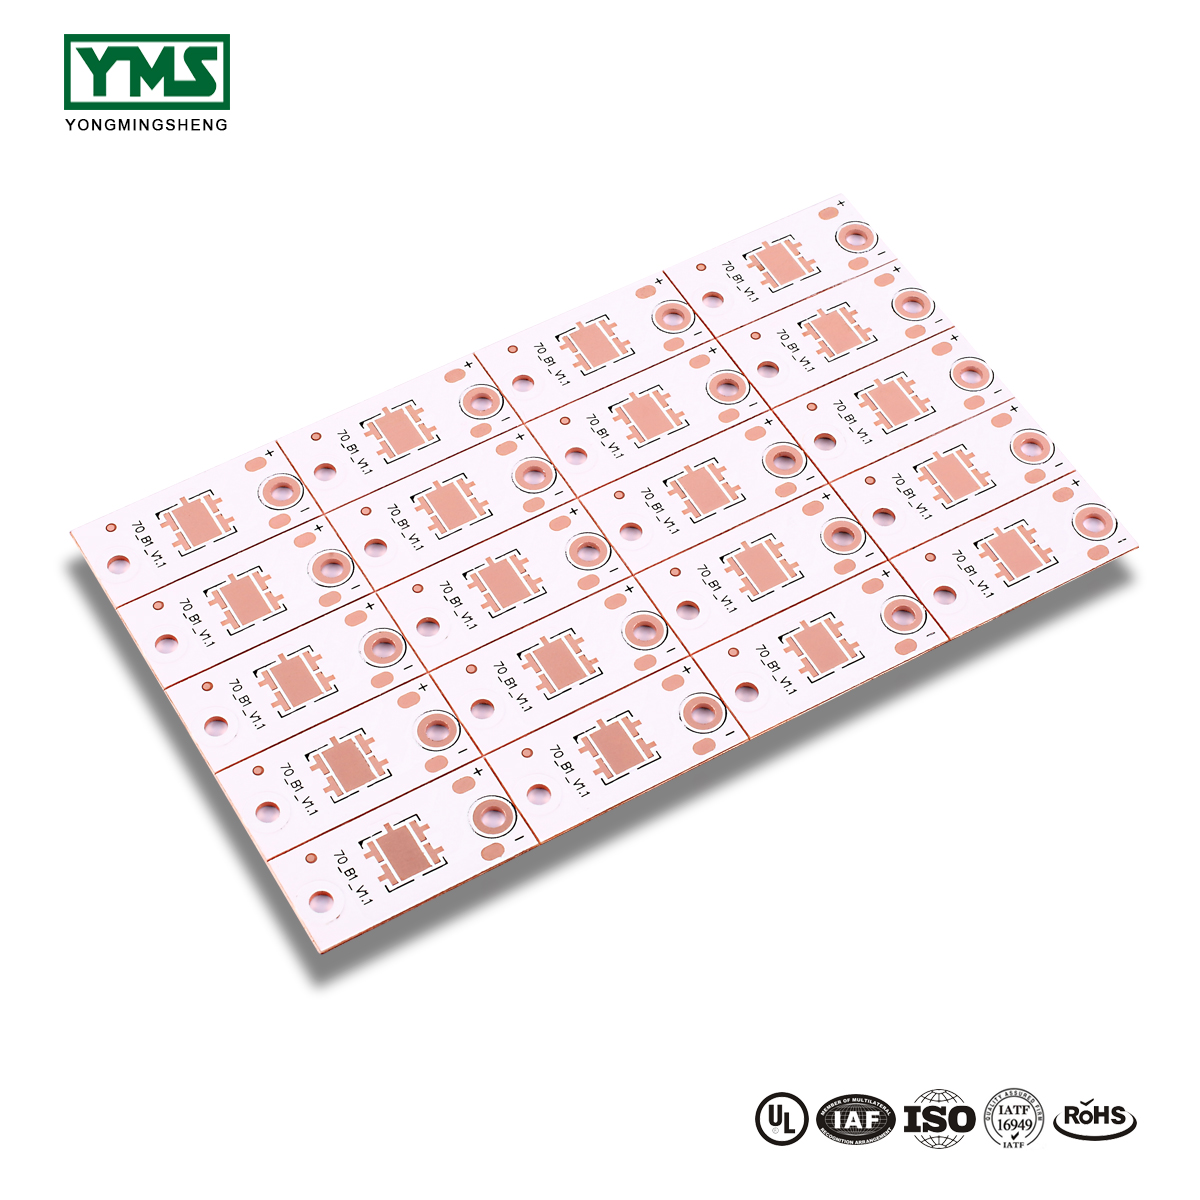 OEM China Lead Free Hasl - 1Layer Thermoelectric Copper base Board | YMSPCB – Yongmingsheng